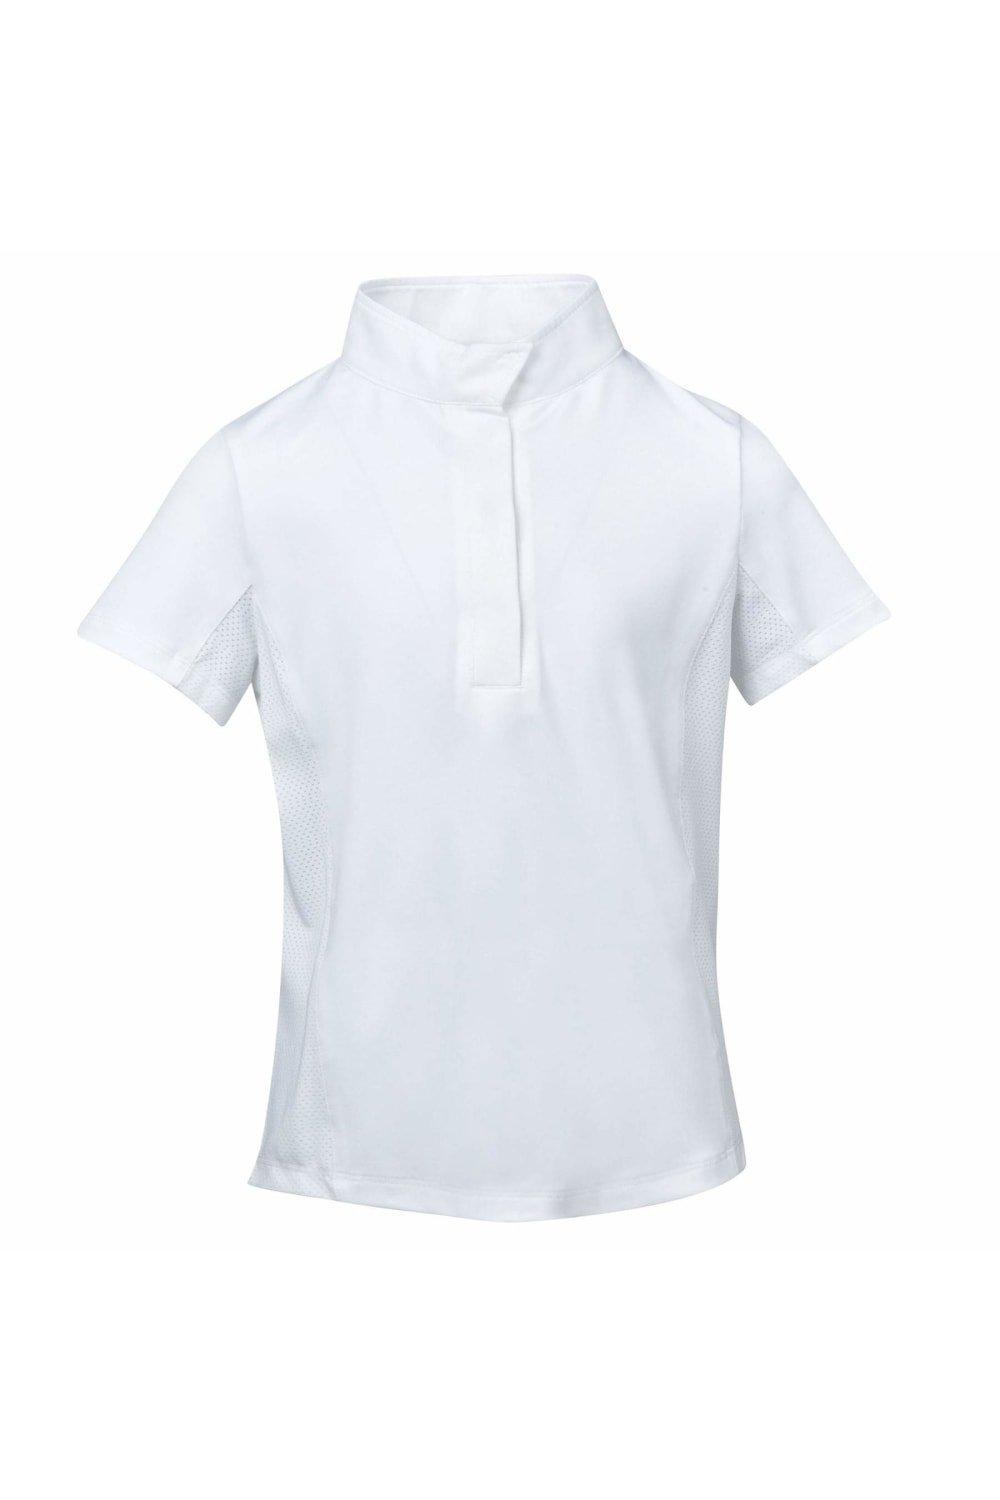 Ria Short-Sleeved Competition Shirt